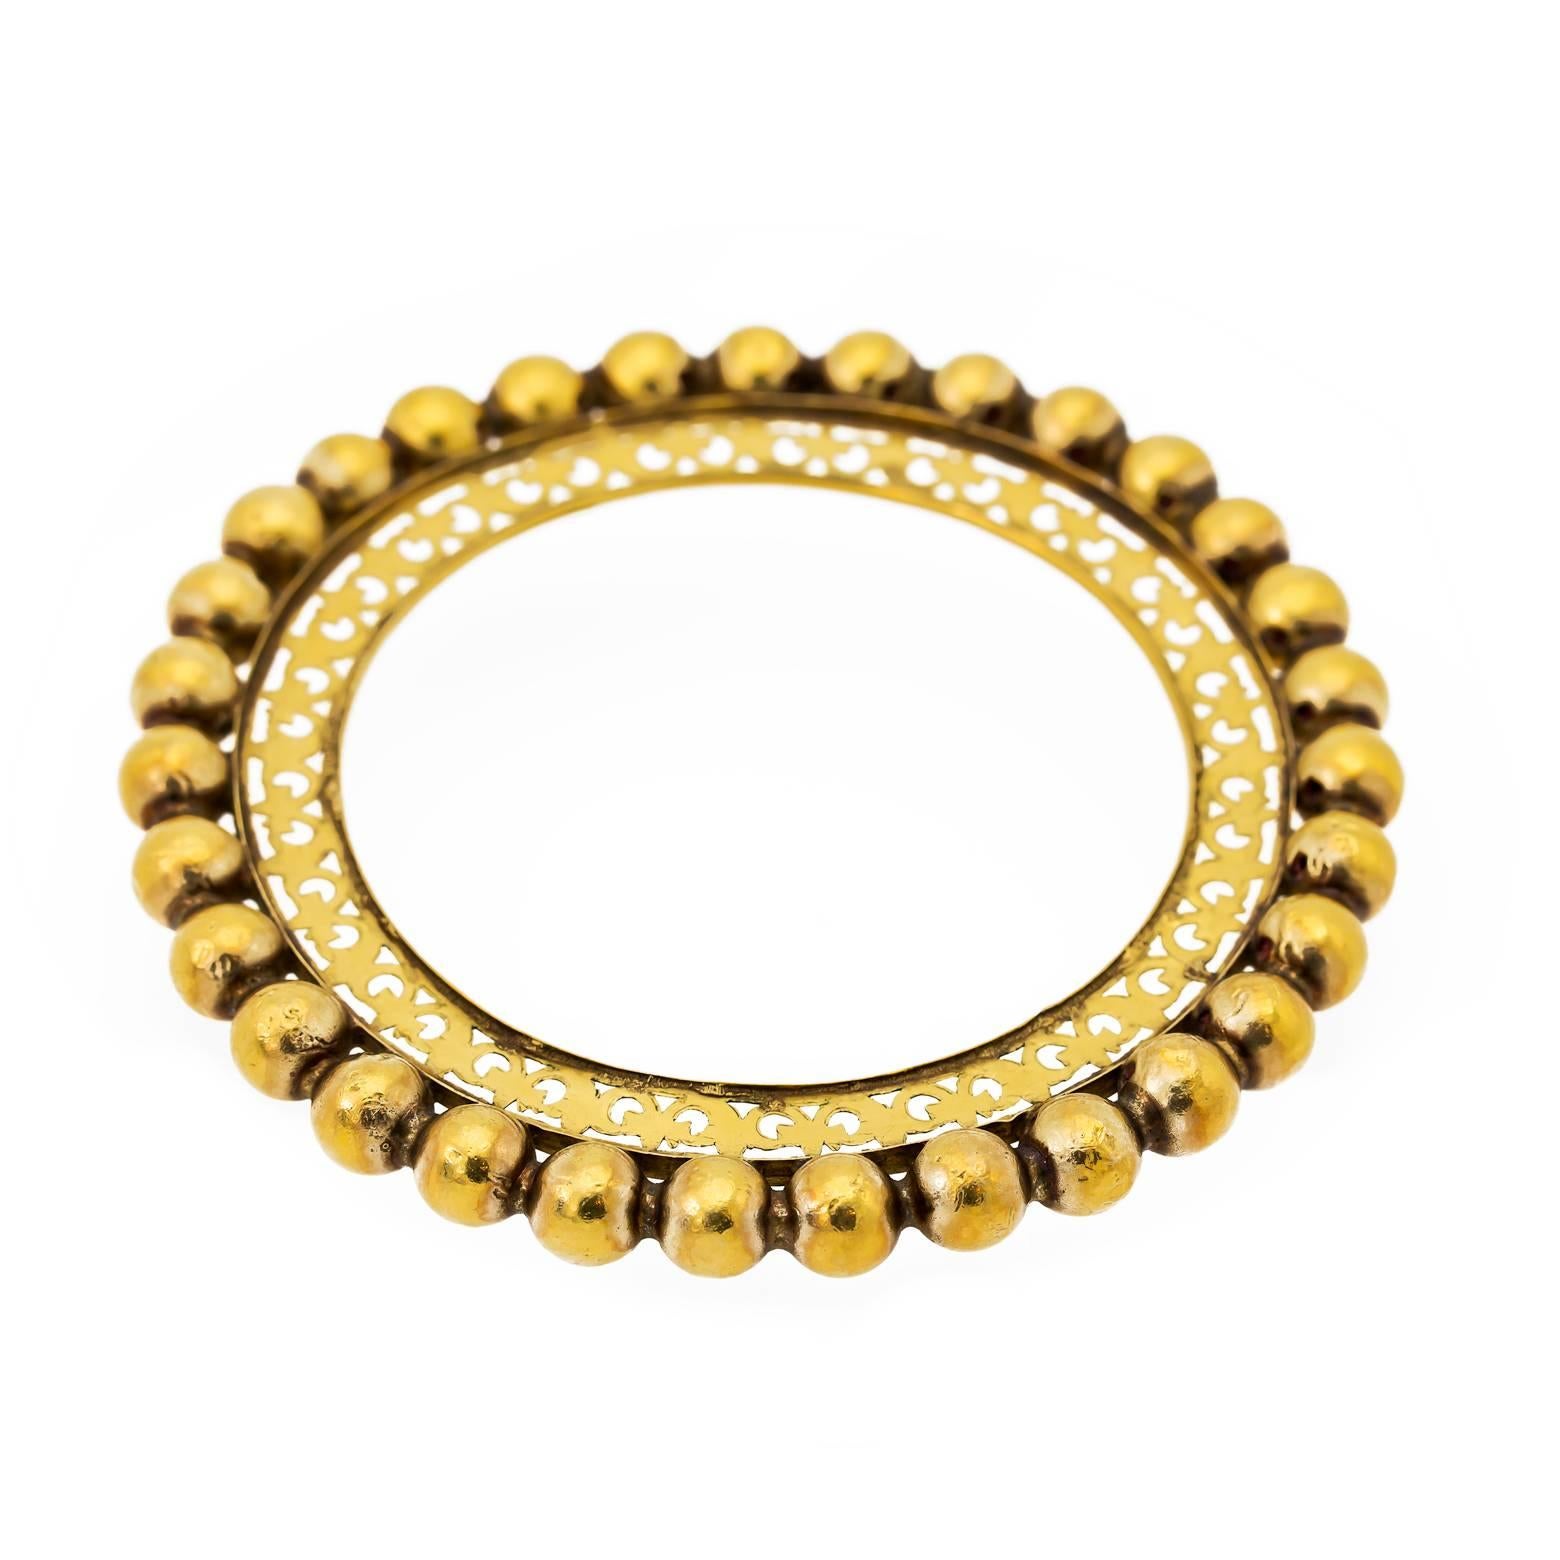 This substantial 18K yellow gold bangle Boho is finely detailed on the inside and has large gold spheres on the border. The inside circumference is meant for a smaller wrist and measures to 2.32 inches. Solid gold in the inner ring and the beads are